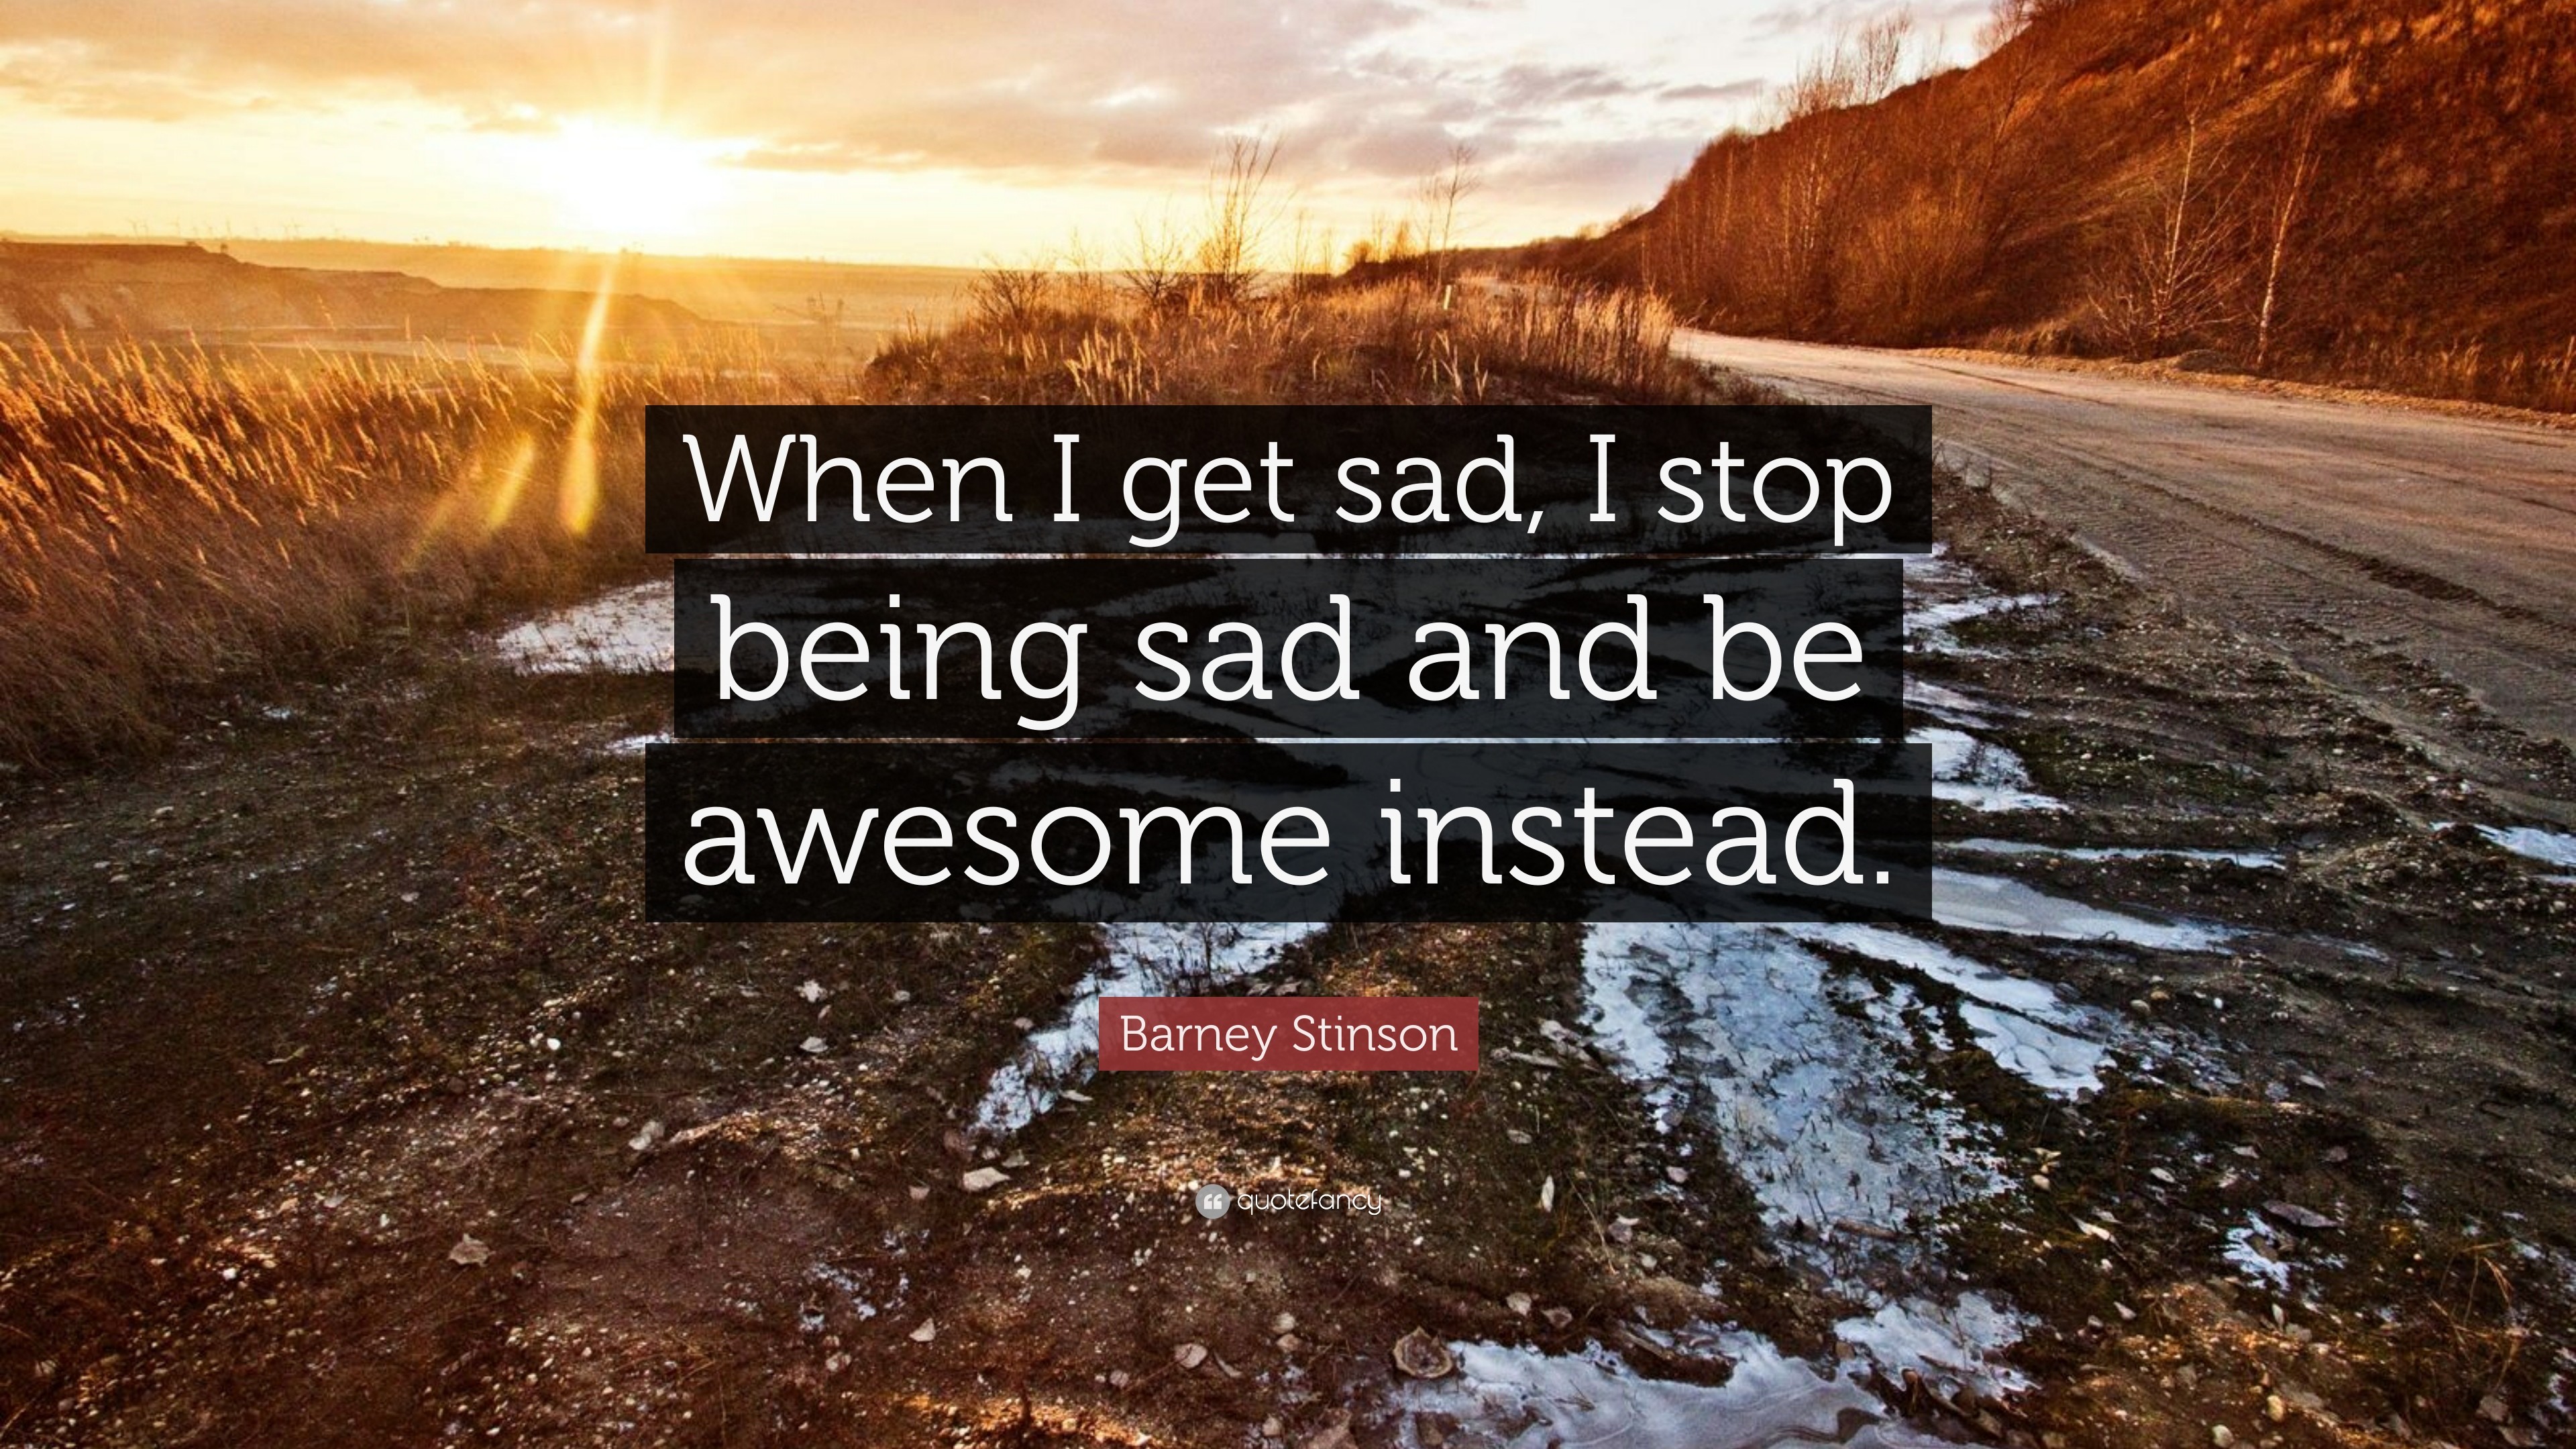 3840x2160 Barney Stinson Quote: “When I get sad, I stop being sad and be